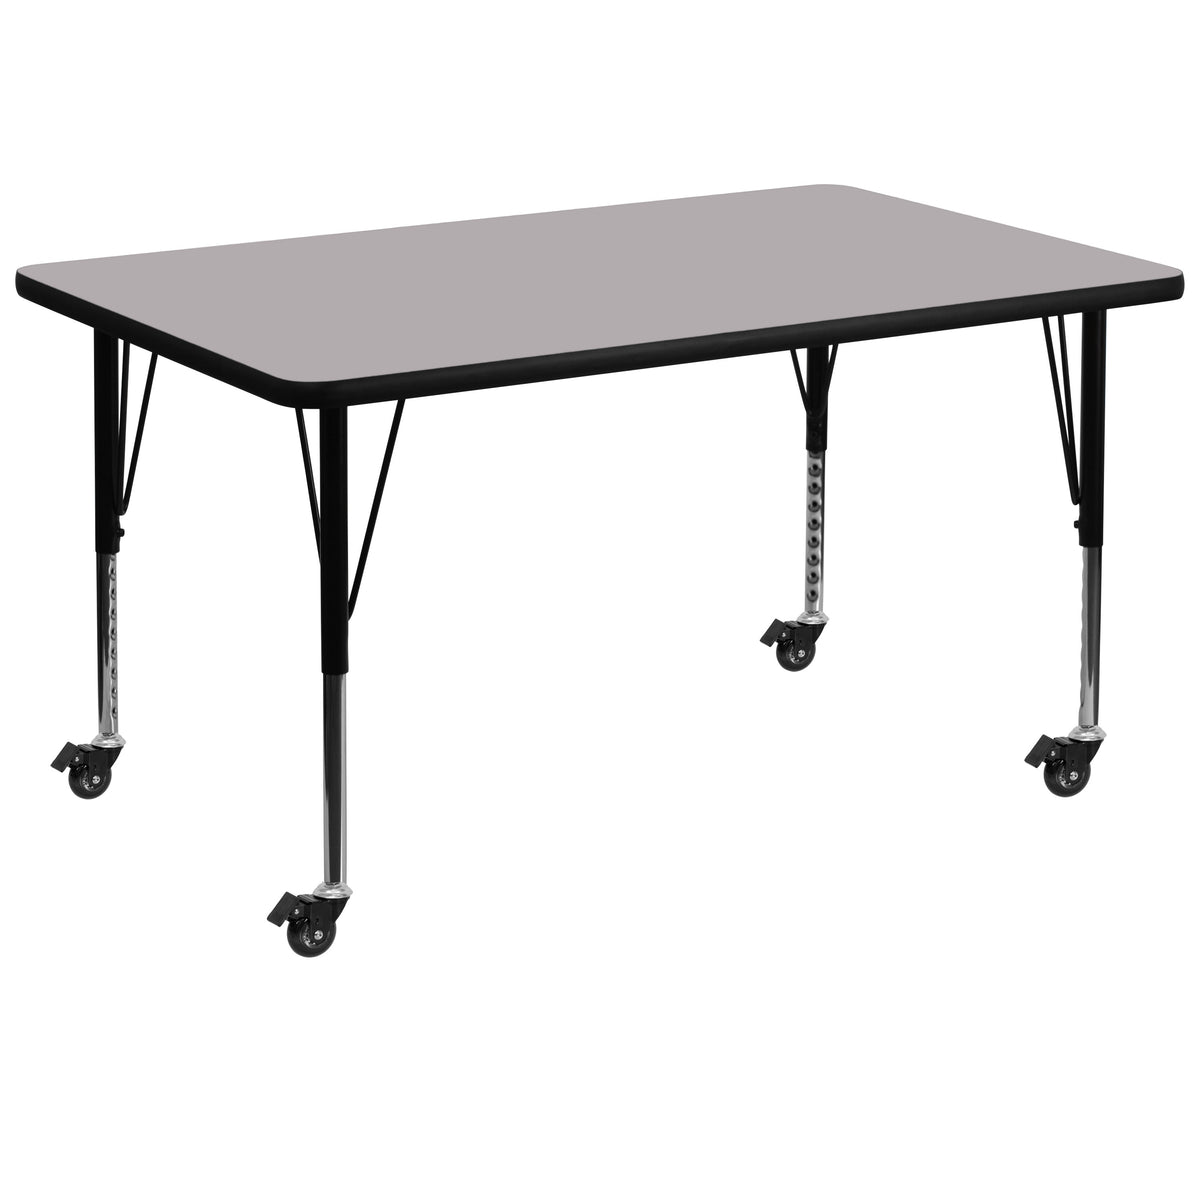 Gray |#| Mobile 36inchW x 72inchL Rectangular Grey Thermal Laminate Adjustable Activity Table